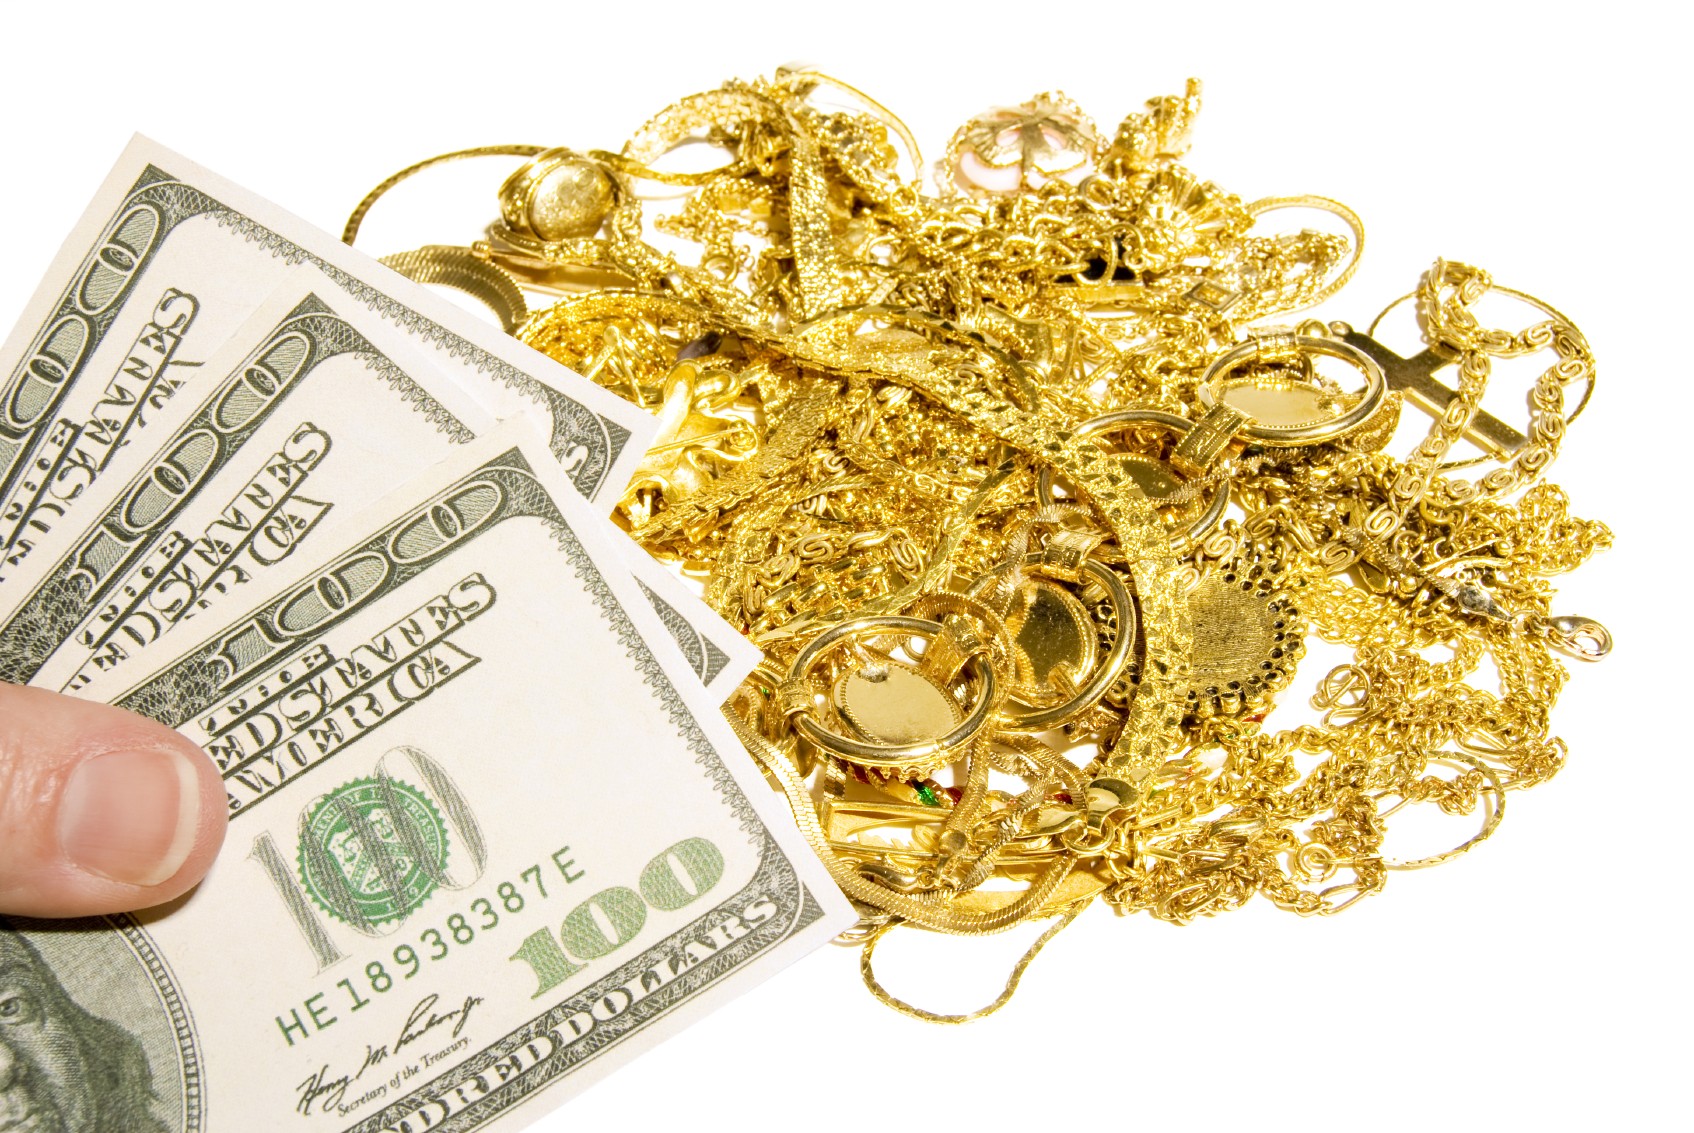     Location For Cash For Gold We Pay Top Prices For Your Gold Jewelry